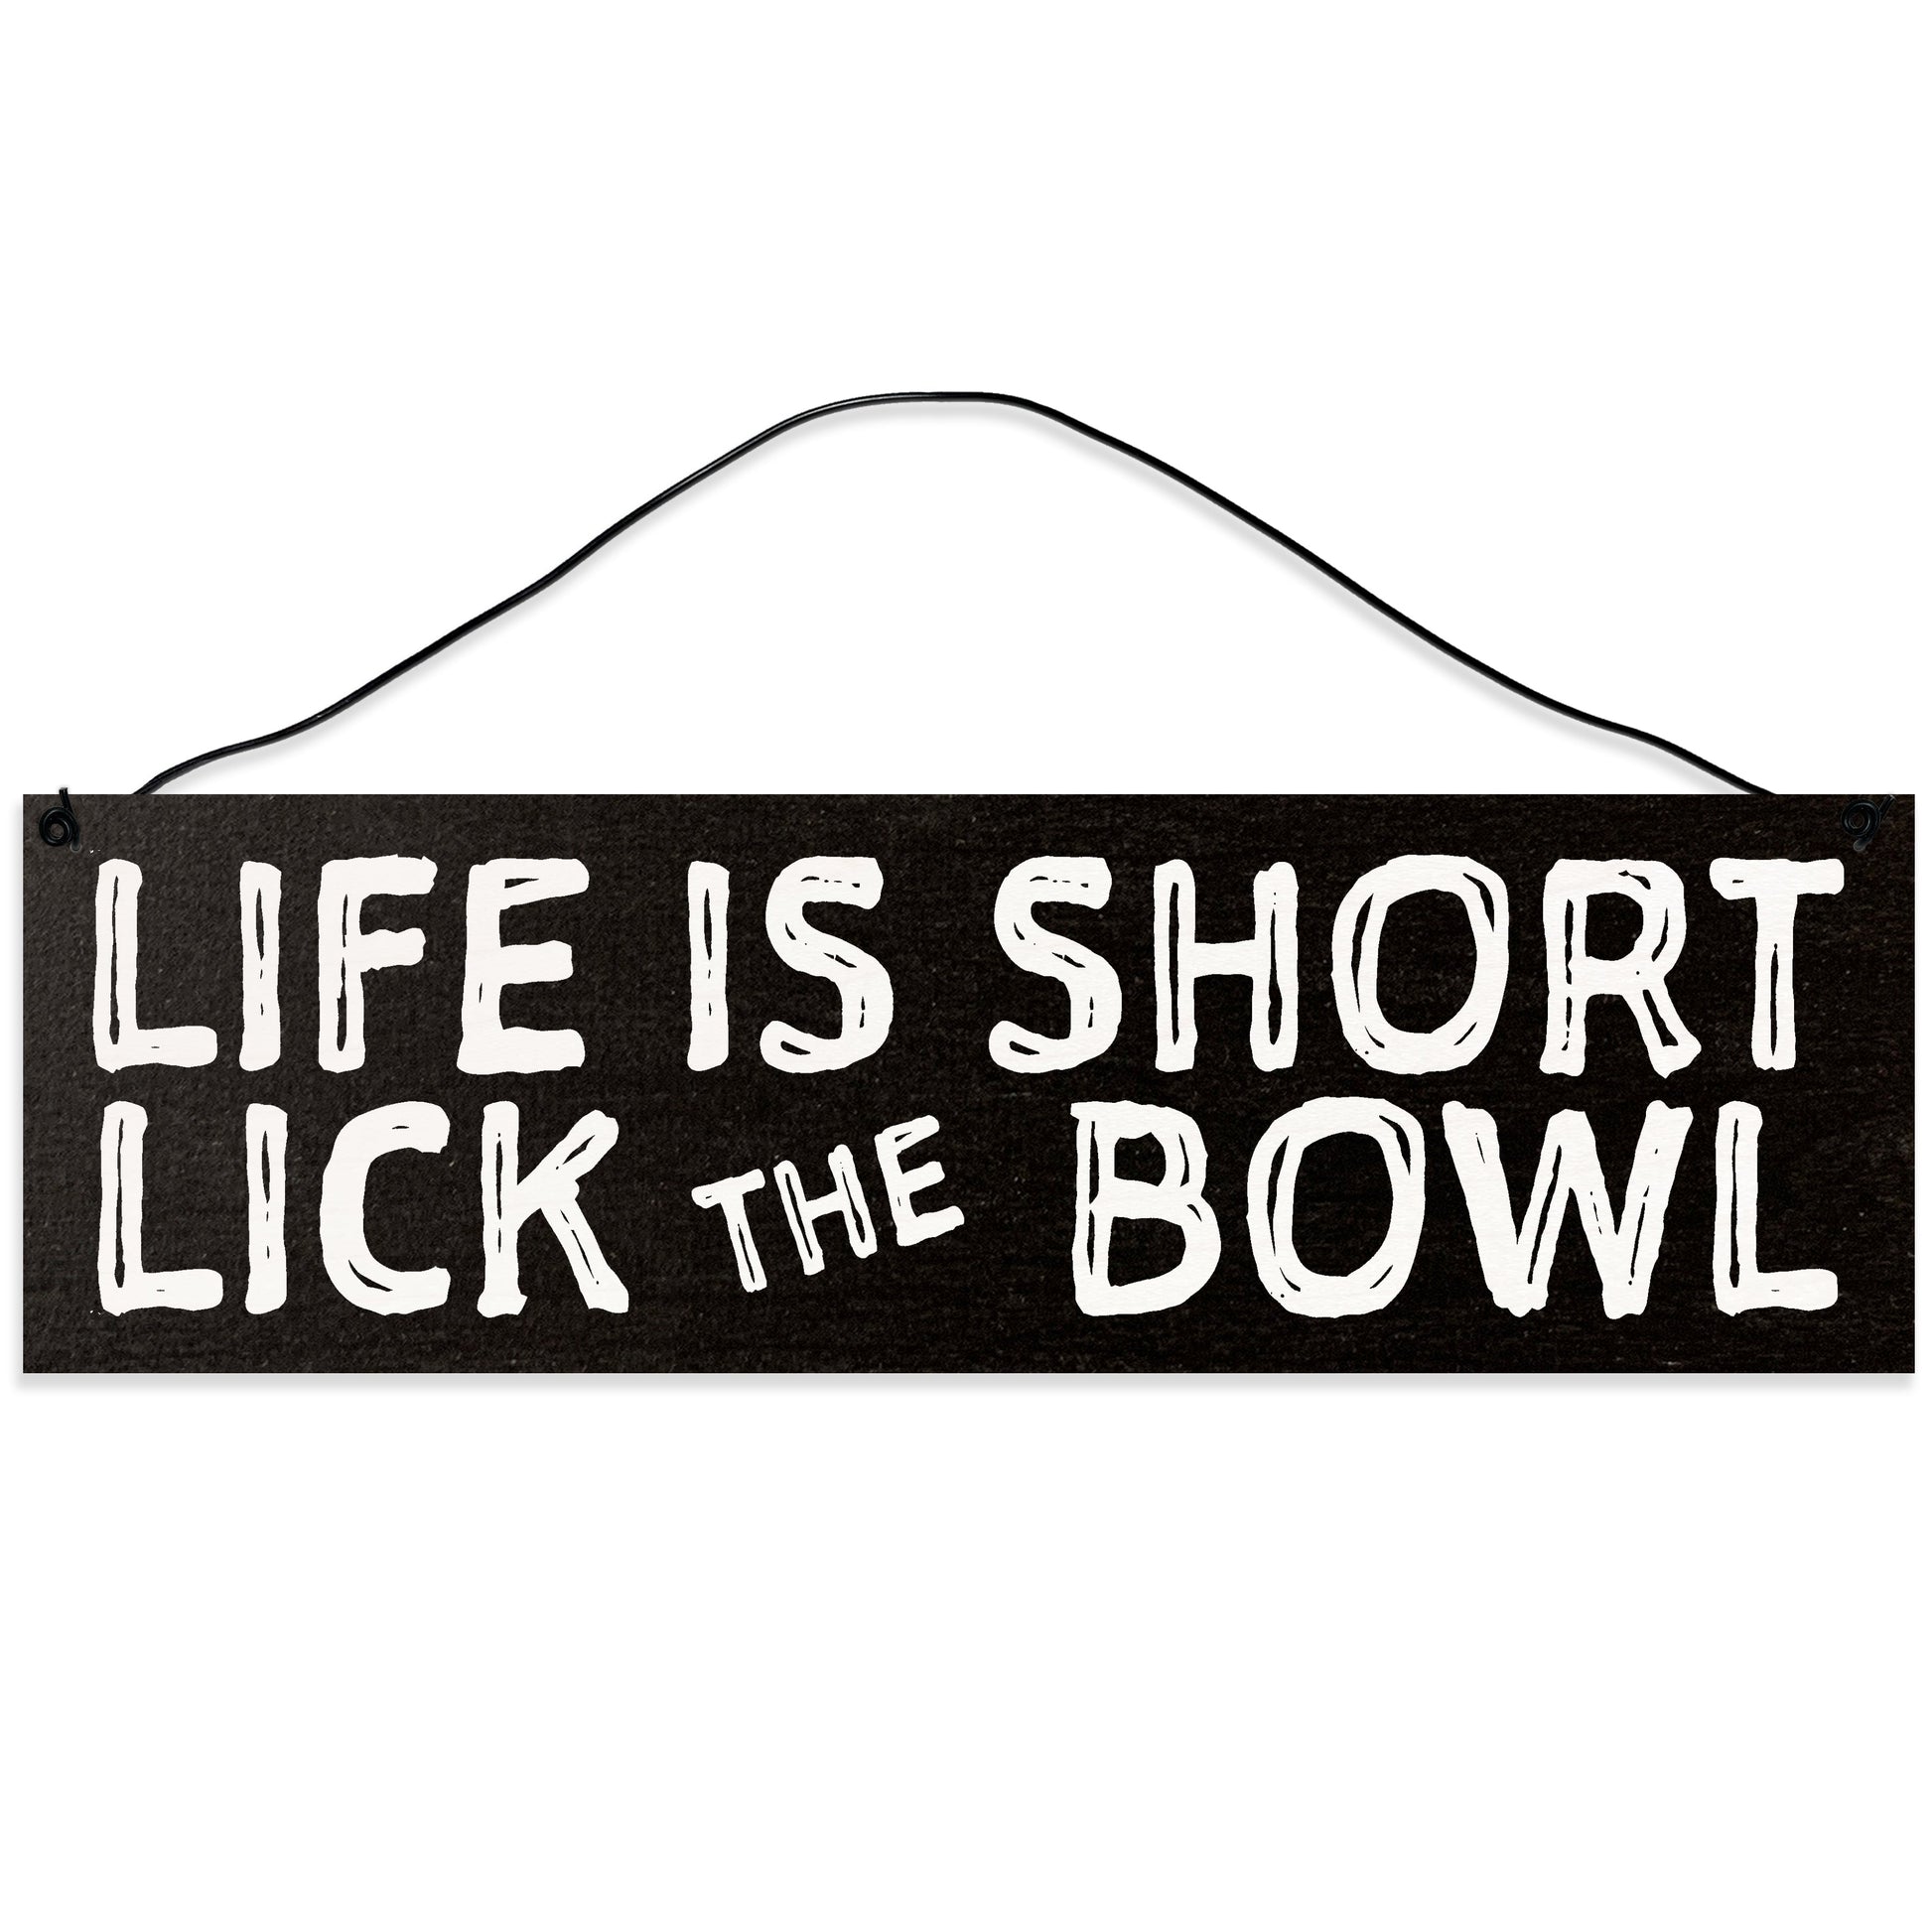 Sawyer's Mill - Life is Short. Lick the Bowl. Wood Sign for Home or Office. Measures 3x10 inches.